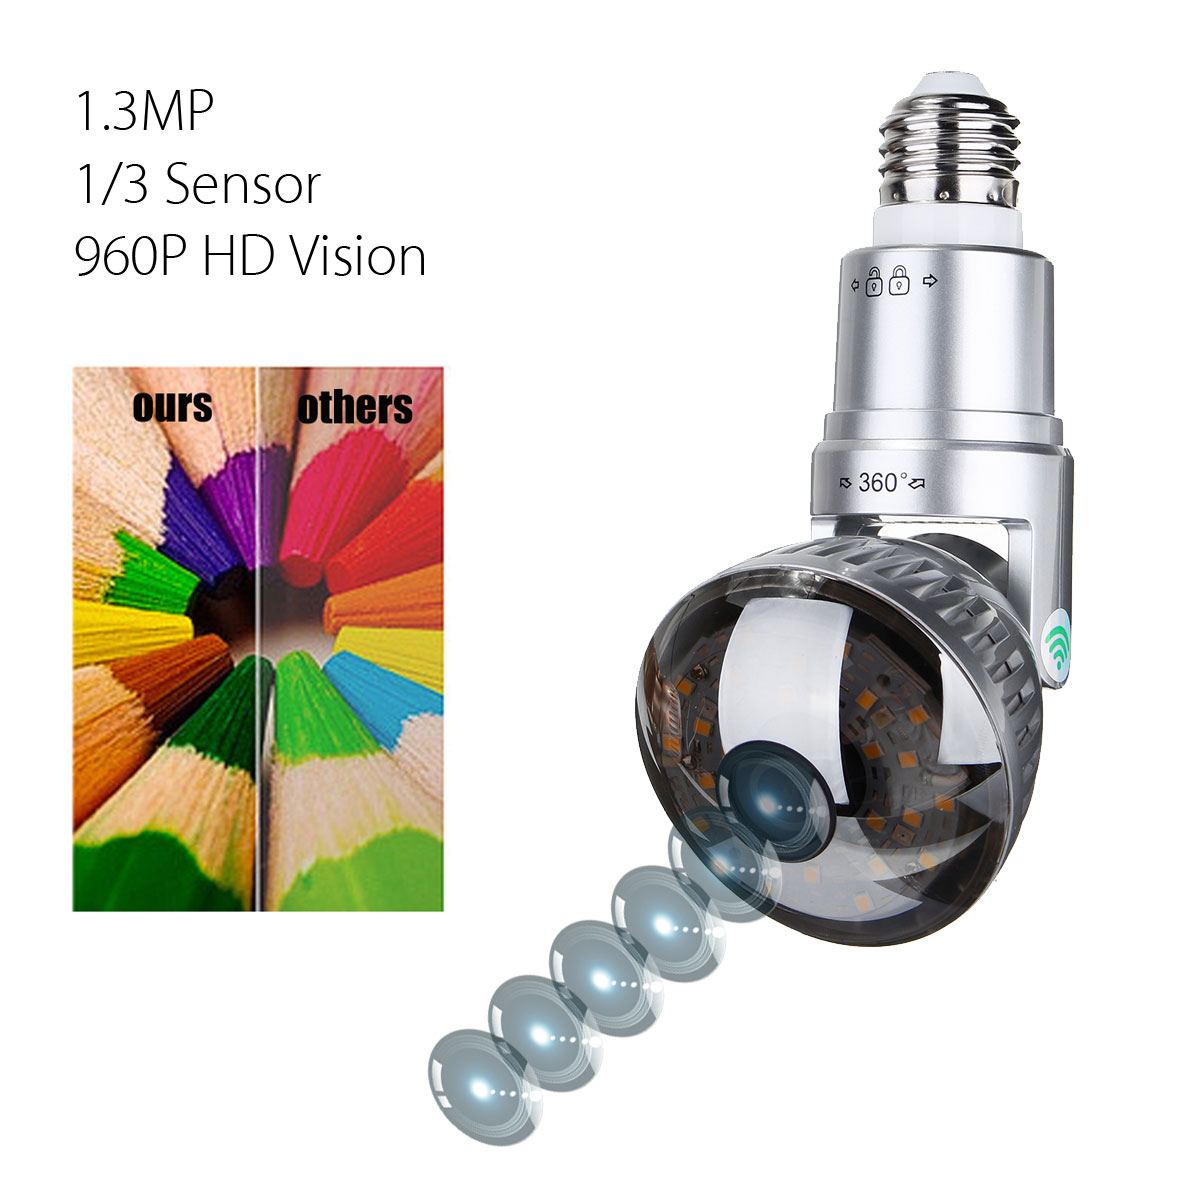 36mm-Wireless-Mirror-Bulb-Security-Camera-DVR-WIFI-LED-Light-IP-Camera-Motion-Detection-1245368